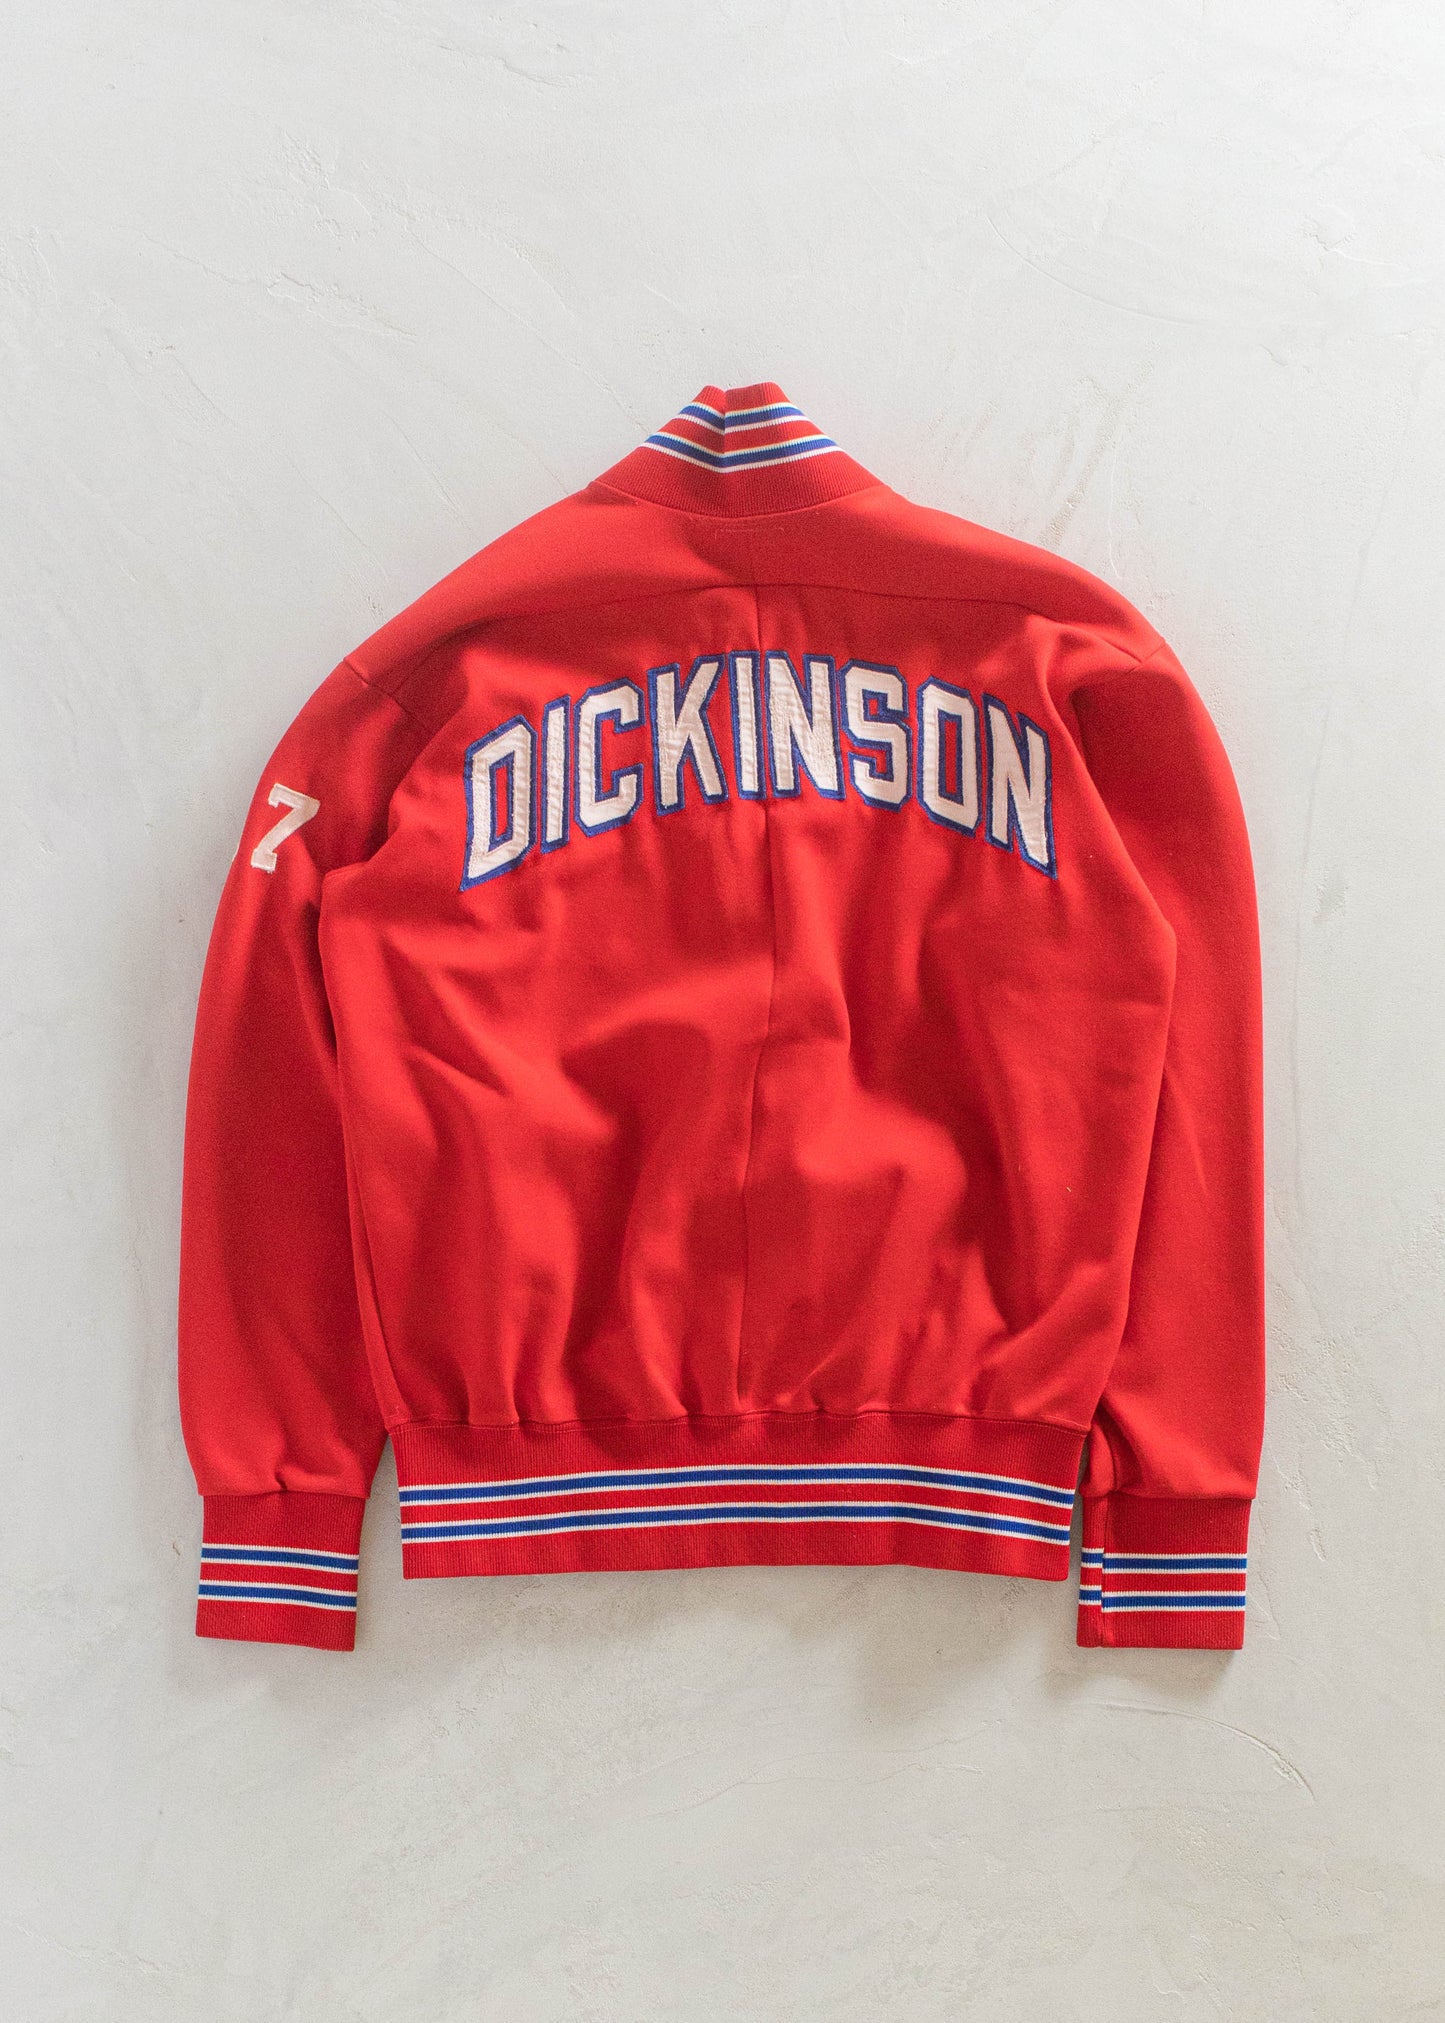 1960s Wilson Track Jacket Size S/M